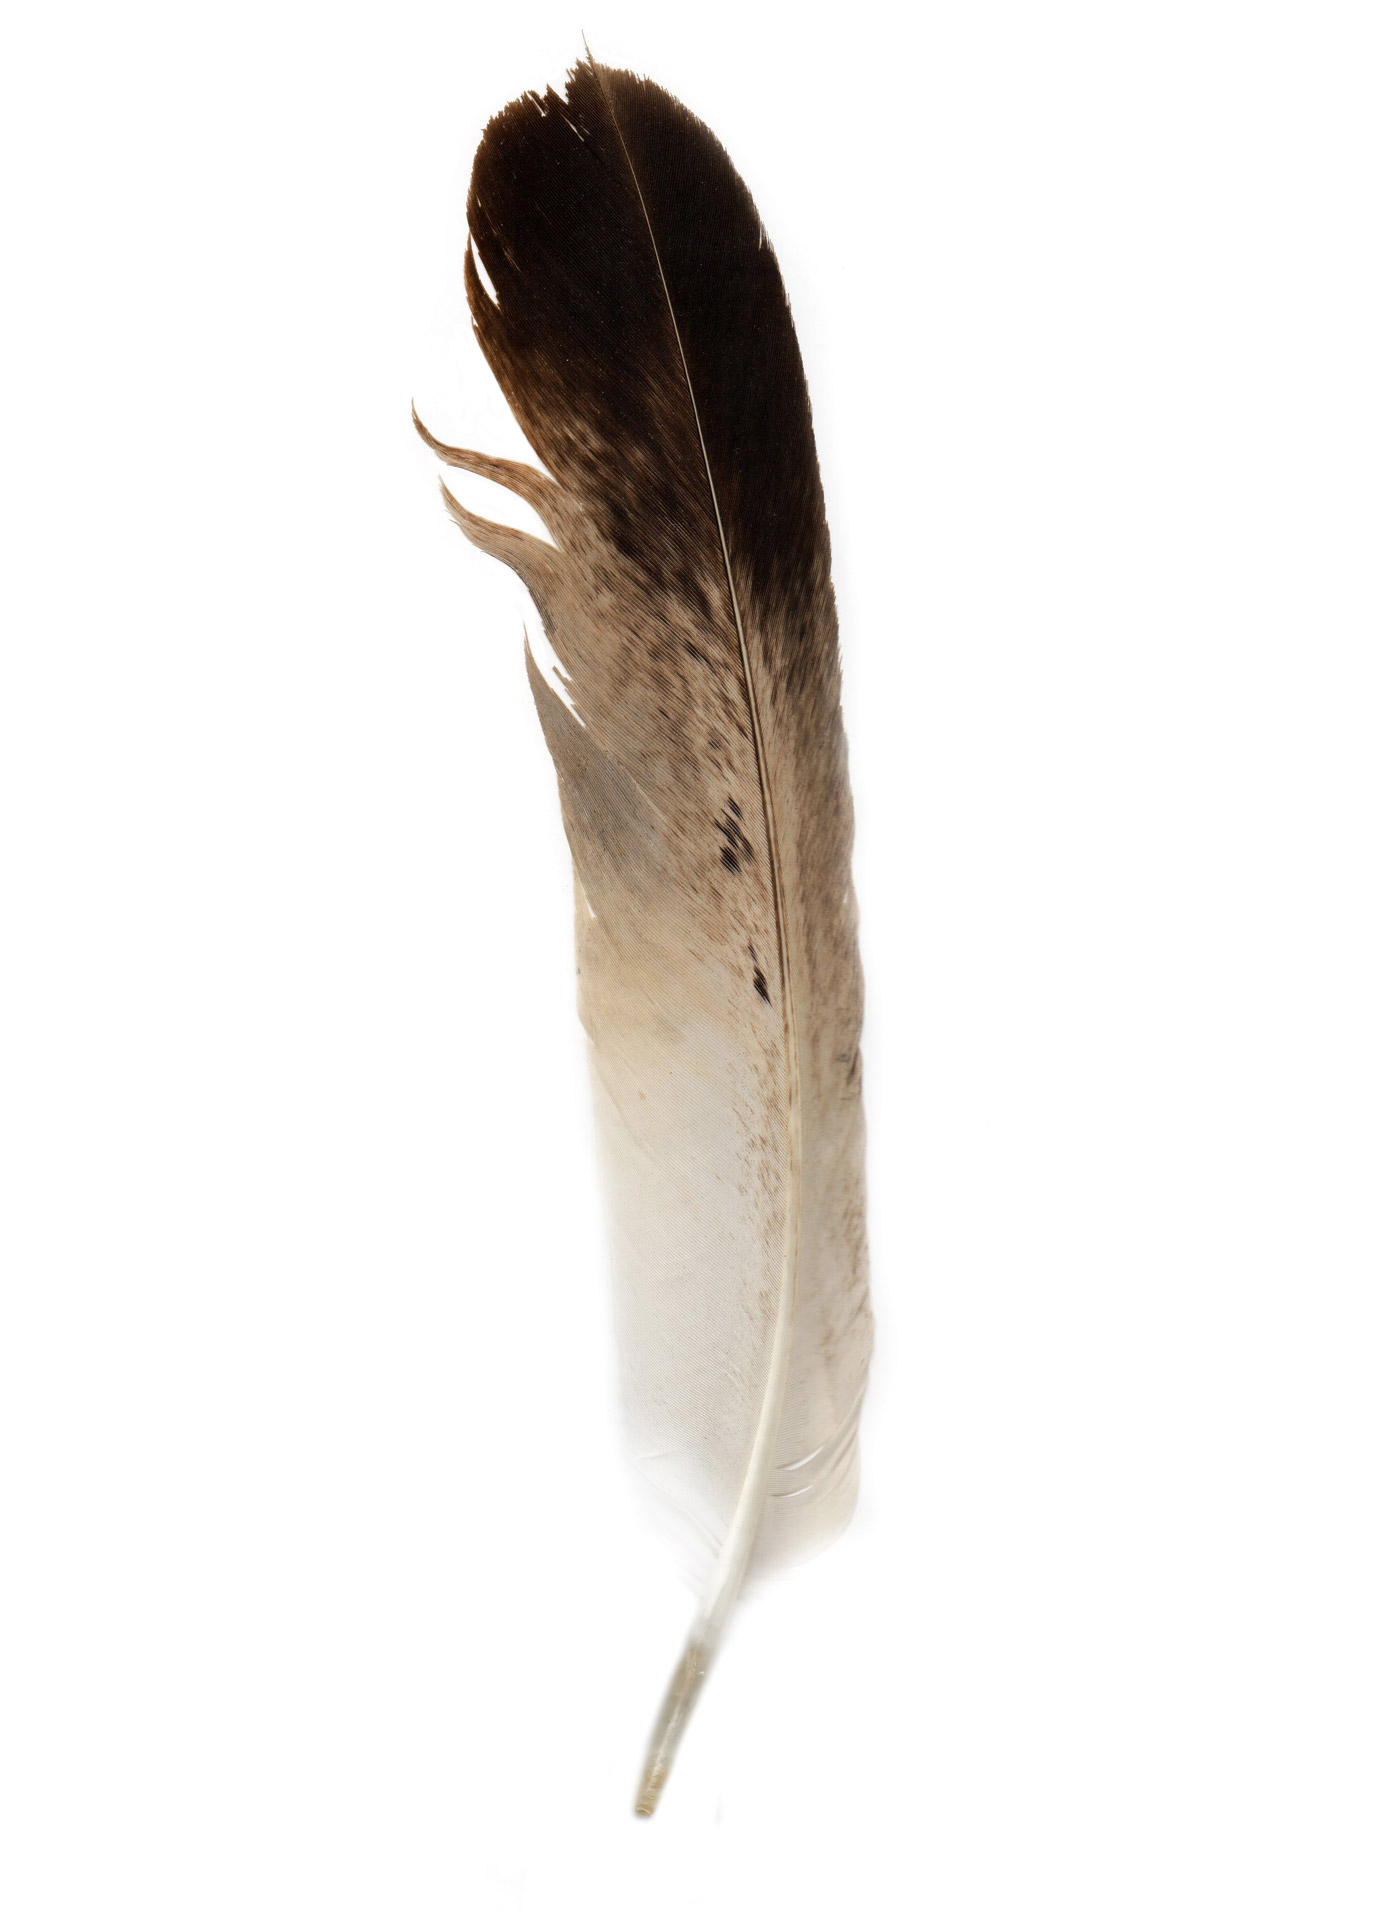 Bird Feather Free Stock Photo - Public Domain Pictures